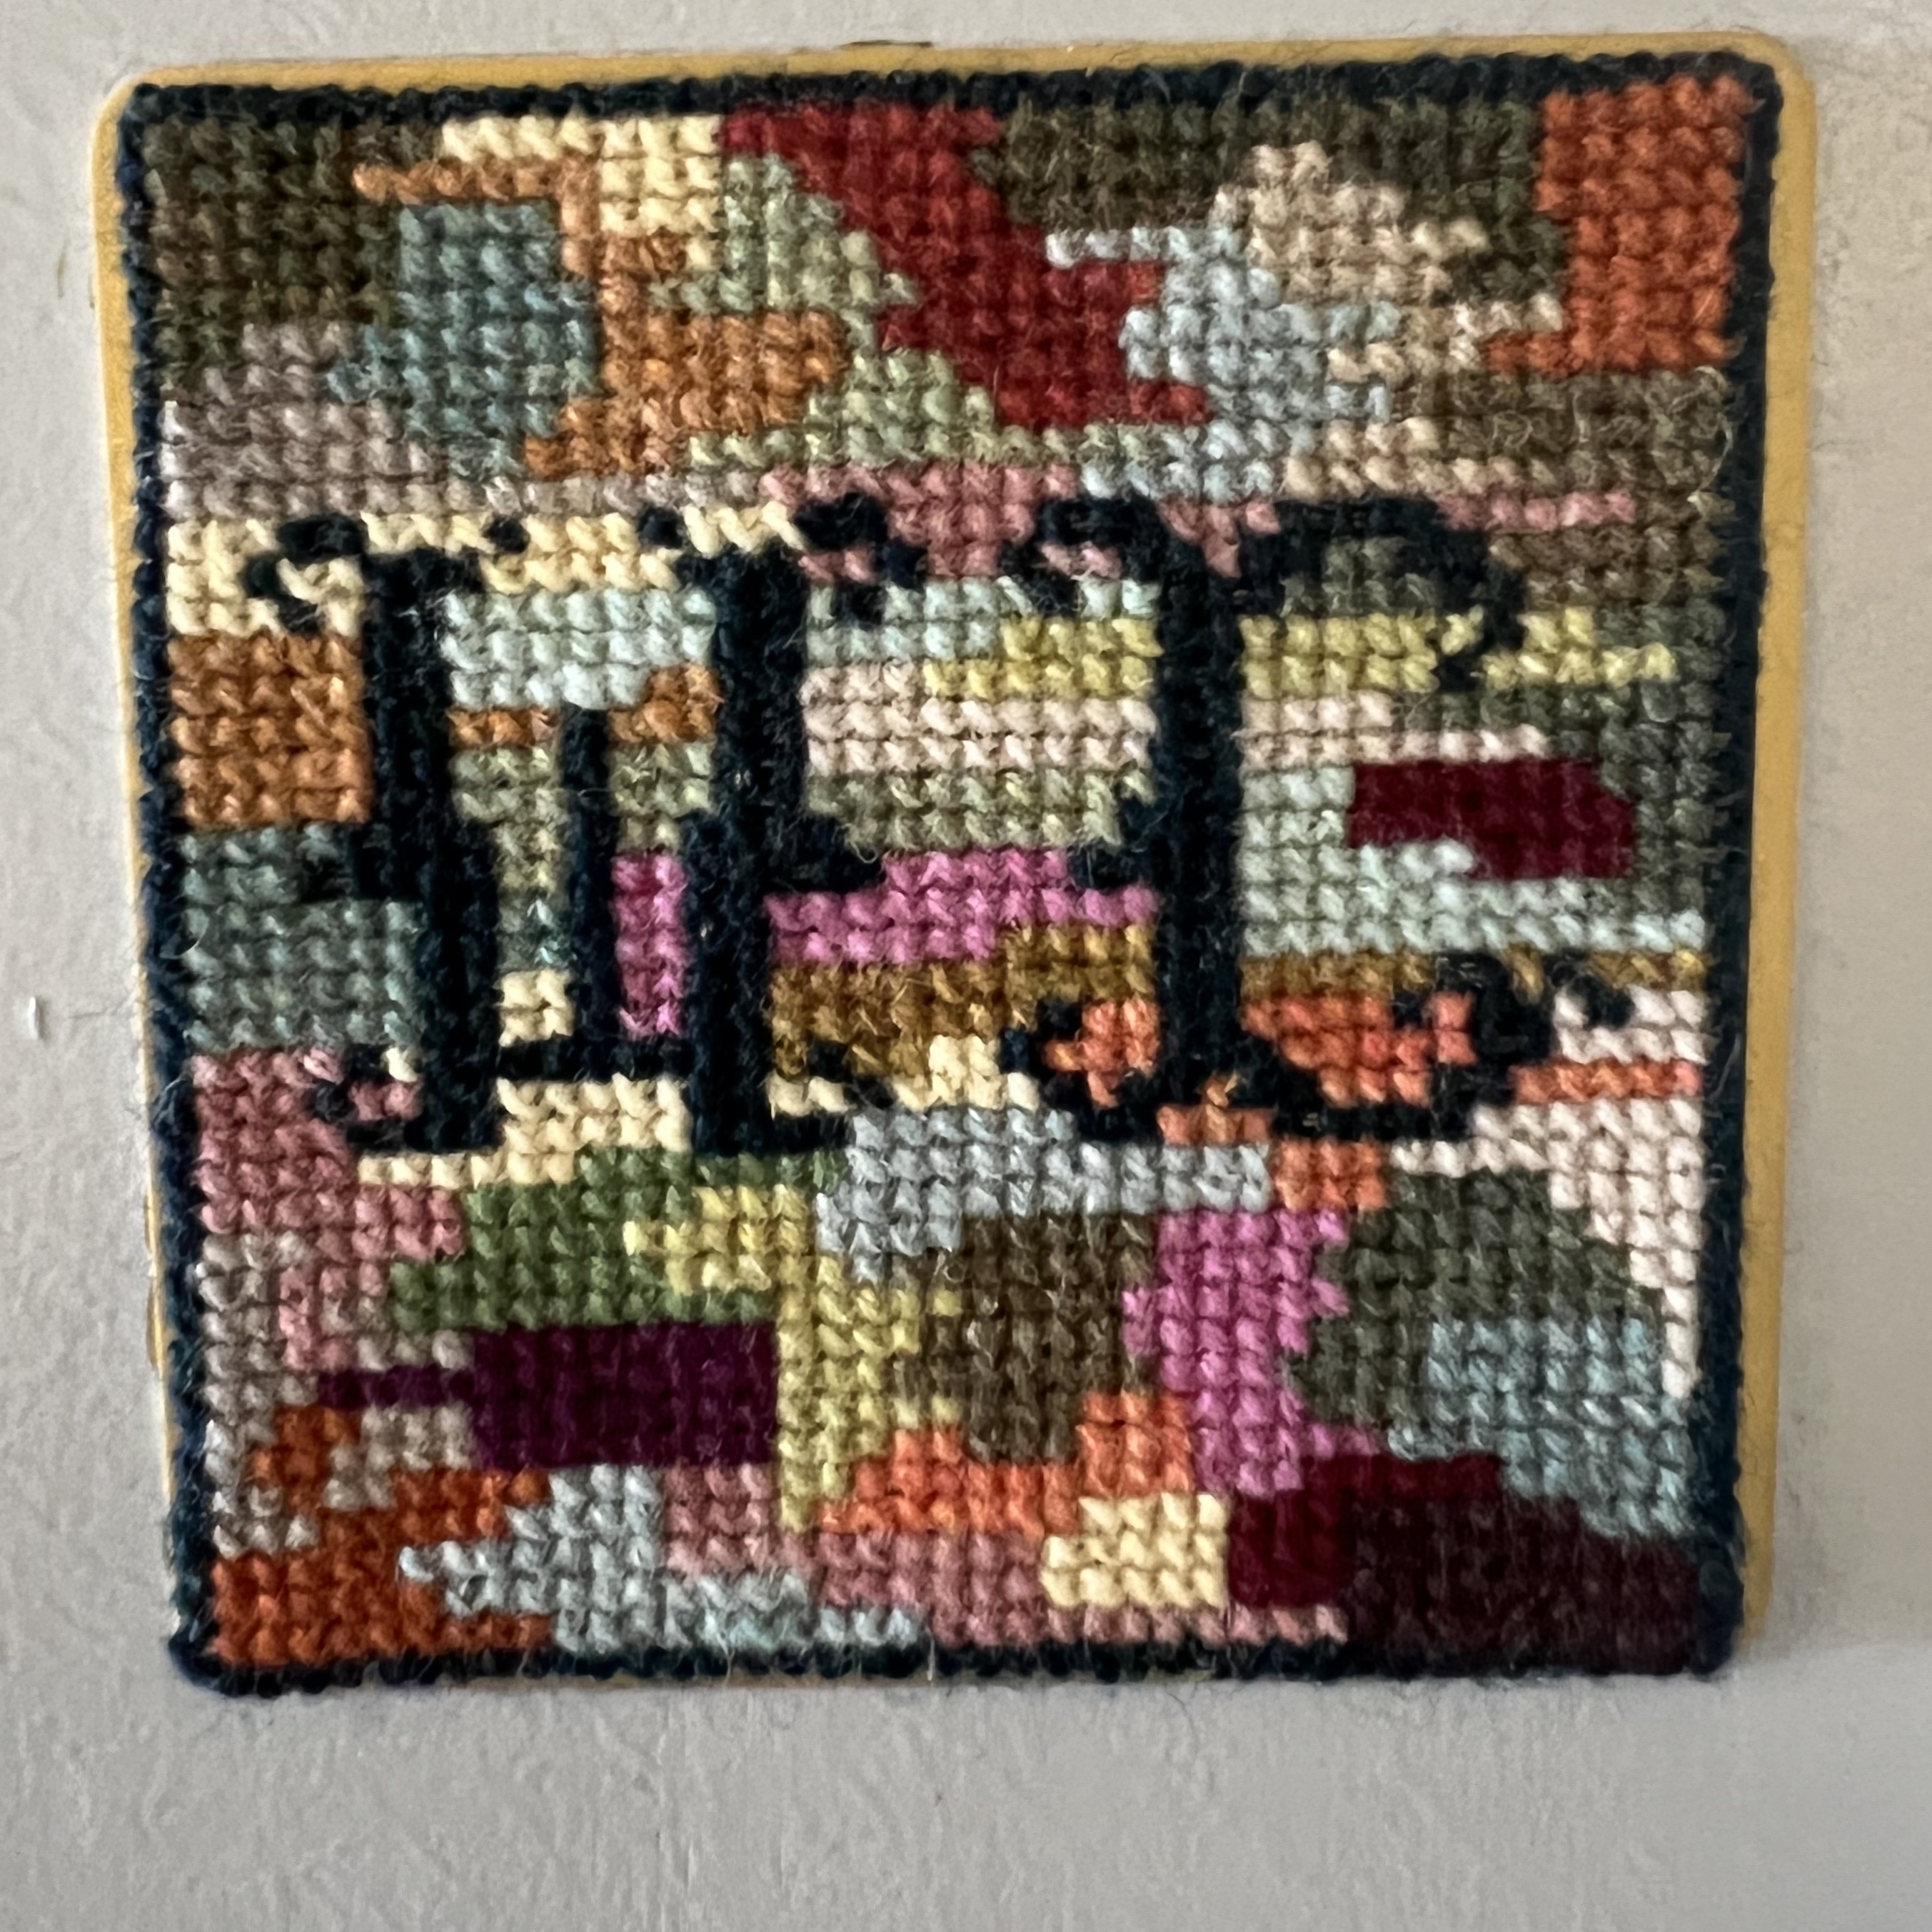 A cross stitched WC sign in warm colors